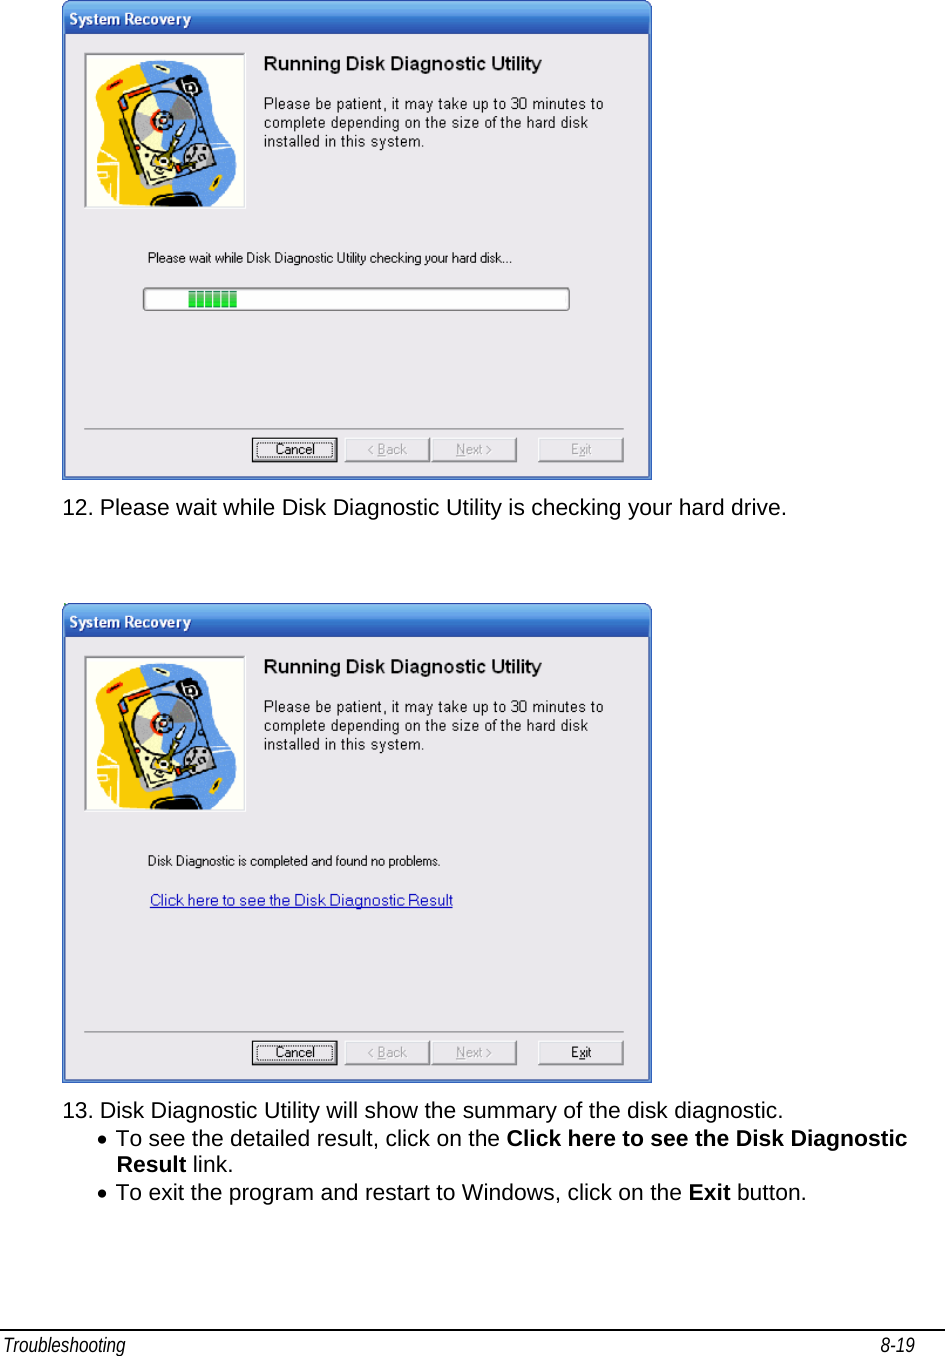 Troubleshooting                                                                                                                                                               8-19                                      12. Please wait while Disk Diagnostic Utility is checking your hard drive.    13. Disk Diagnostic Utility will show the summary of the disk diagnostic. • To see the detailed result, click on the Click here to see the Disk Diagnostic Result link.  • To exit the program and restart to Windows, click on the Exit button.    